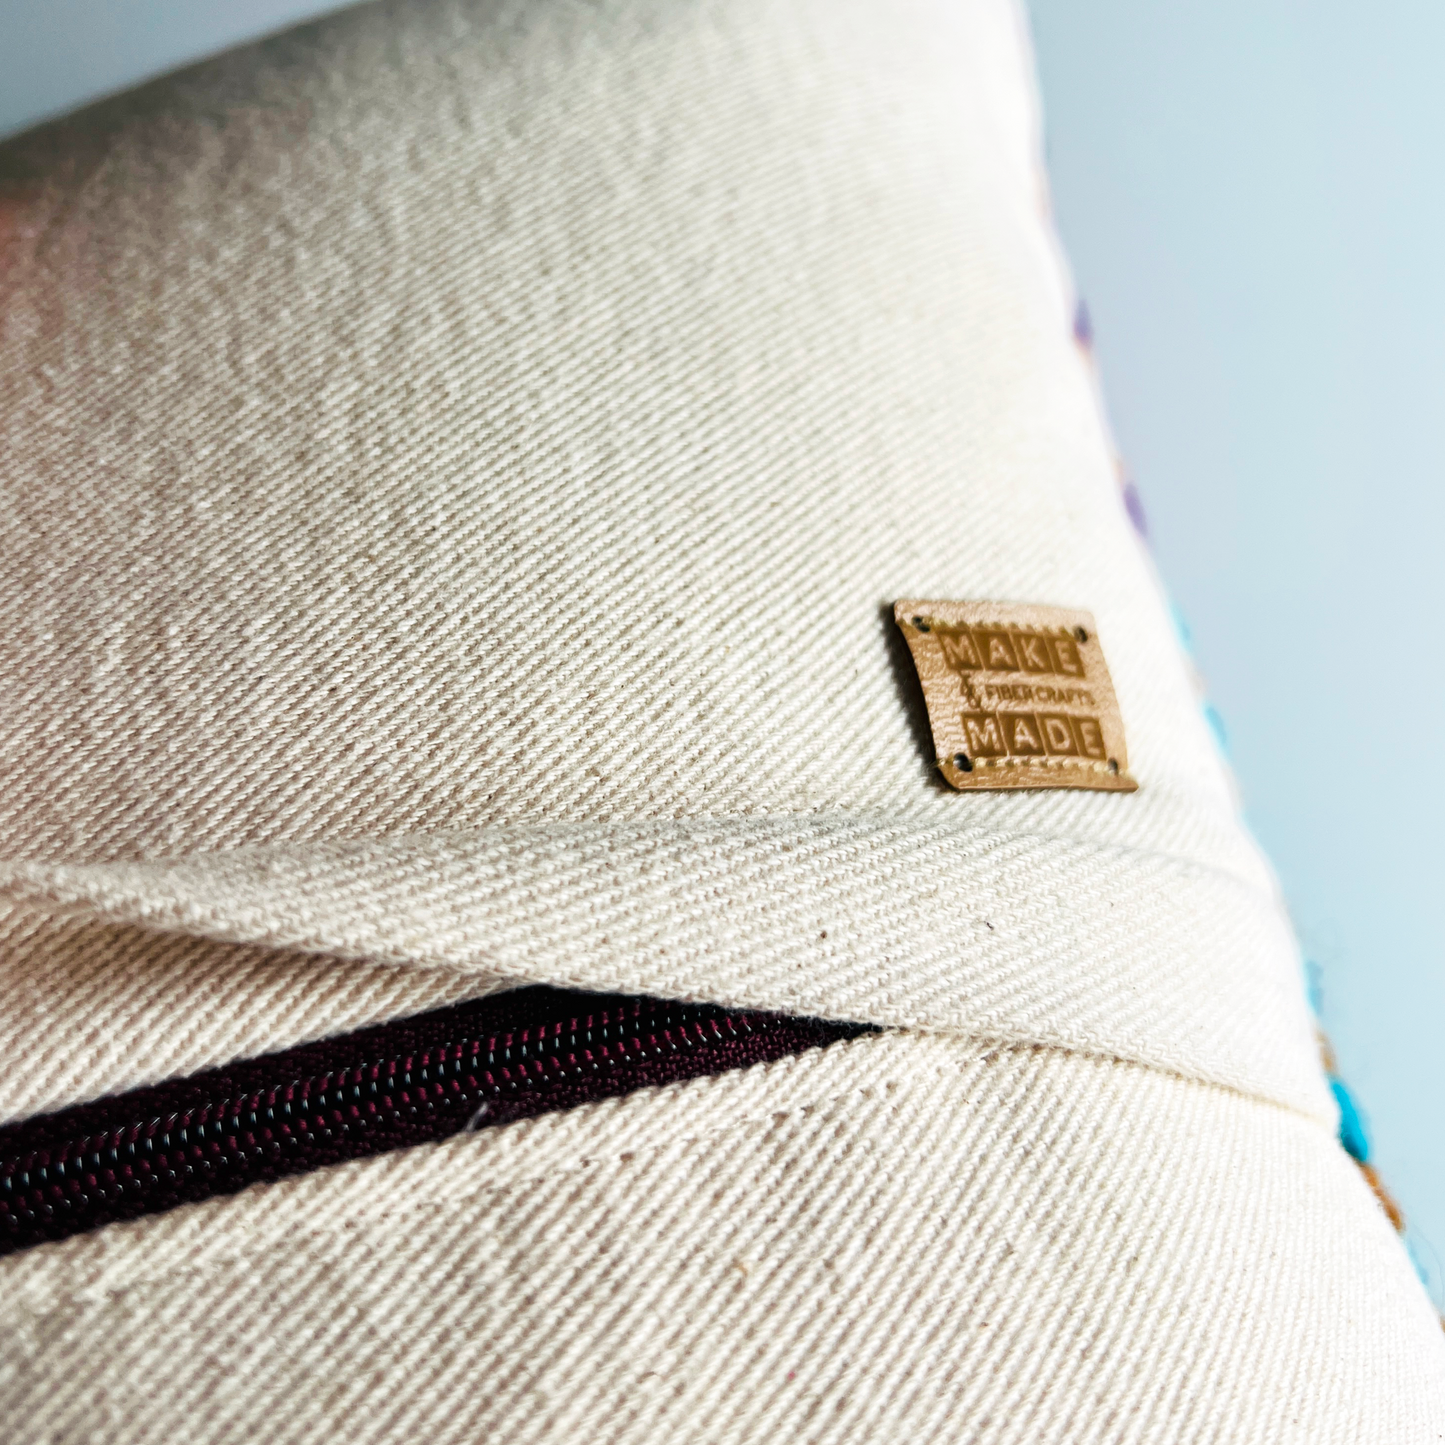 A complementary dark wine zipper is hidden beneath a denim flap on the back of the pillow, making this pillow cover easy to remove for spot cleaning.